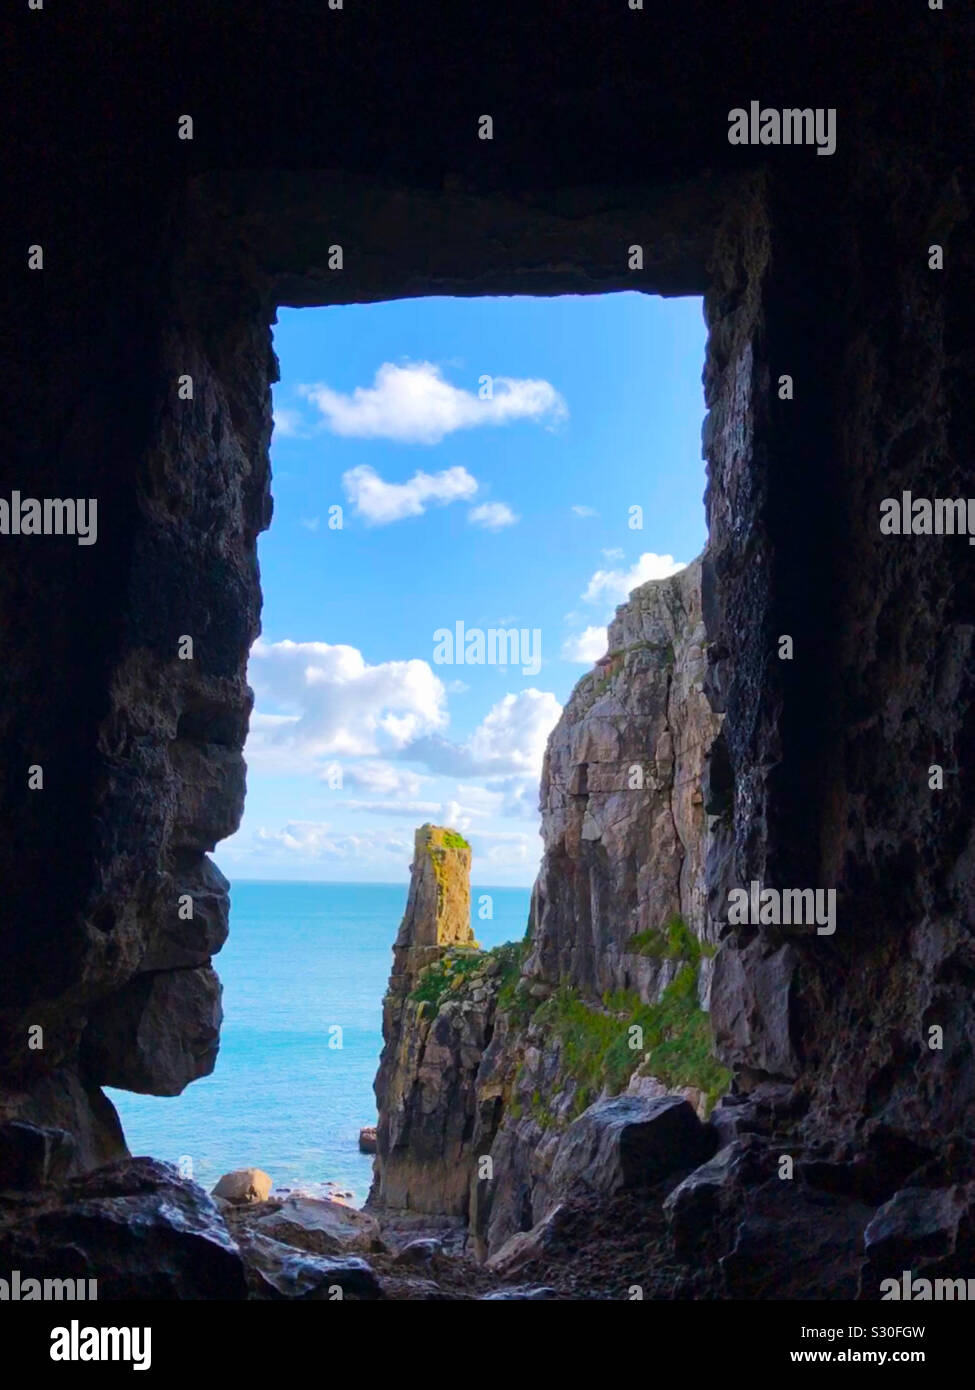 Looking out at the Celtic Sea from the interior of St. Govan’s Chapel,  St. Govan’s Head, Bosherston in the Pembrokeshire Coast National Park, Dyfed, Wales. Stock Photo